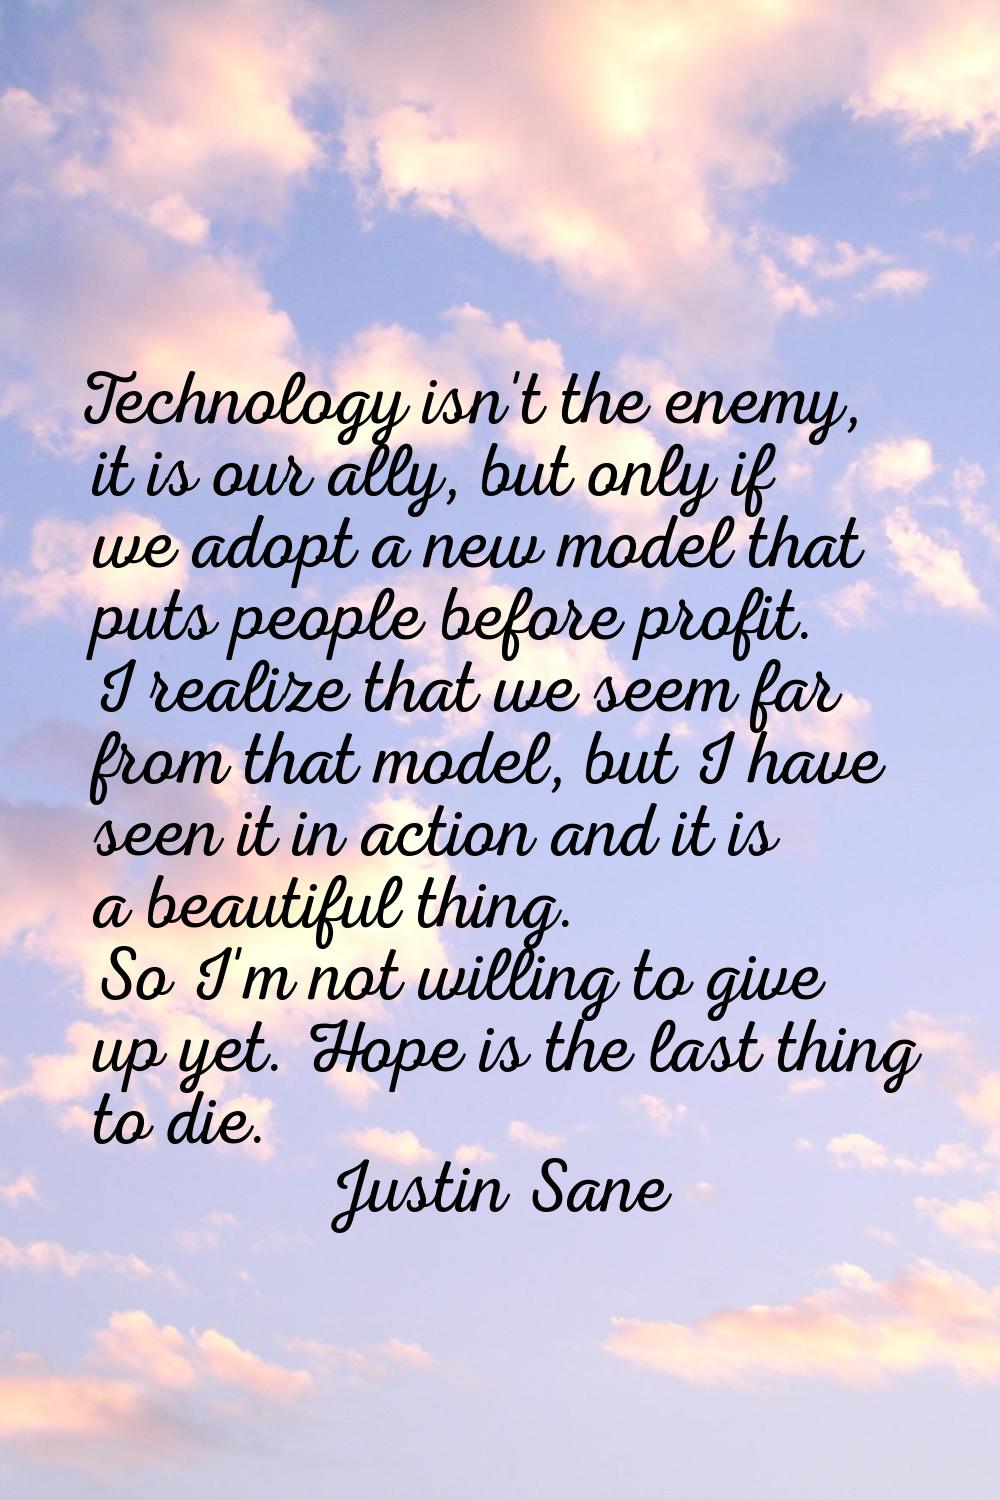 Technology isn't the enemy, it is our ally, but only if we adopt a new model that puts people befor